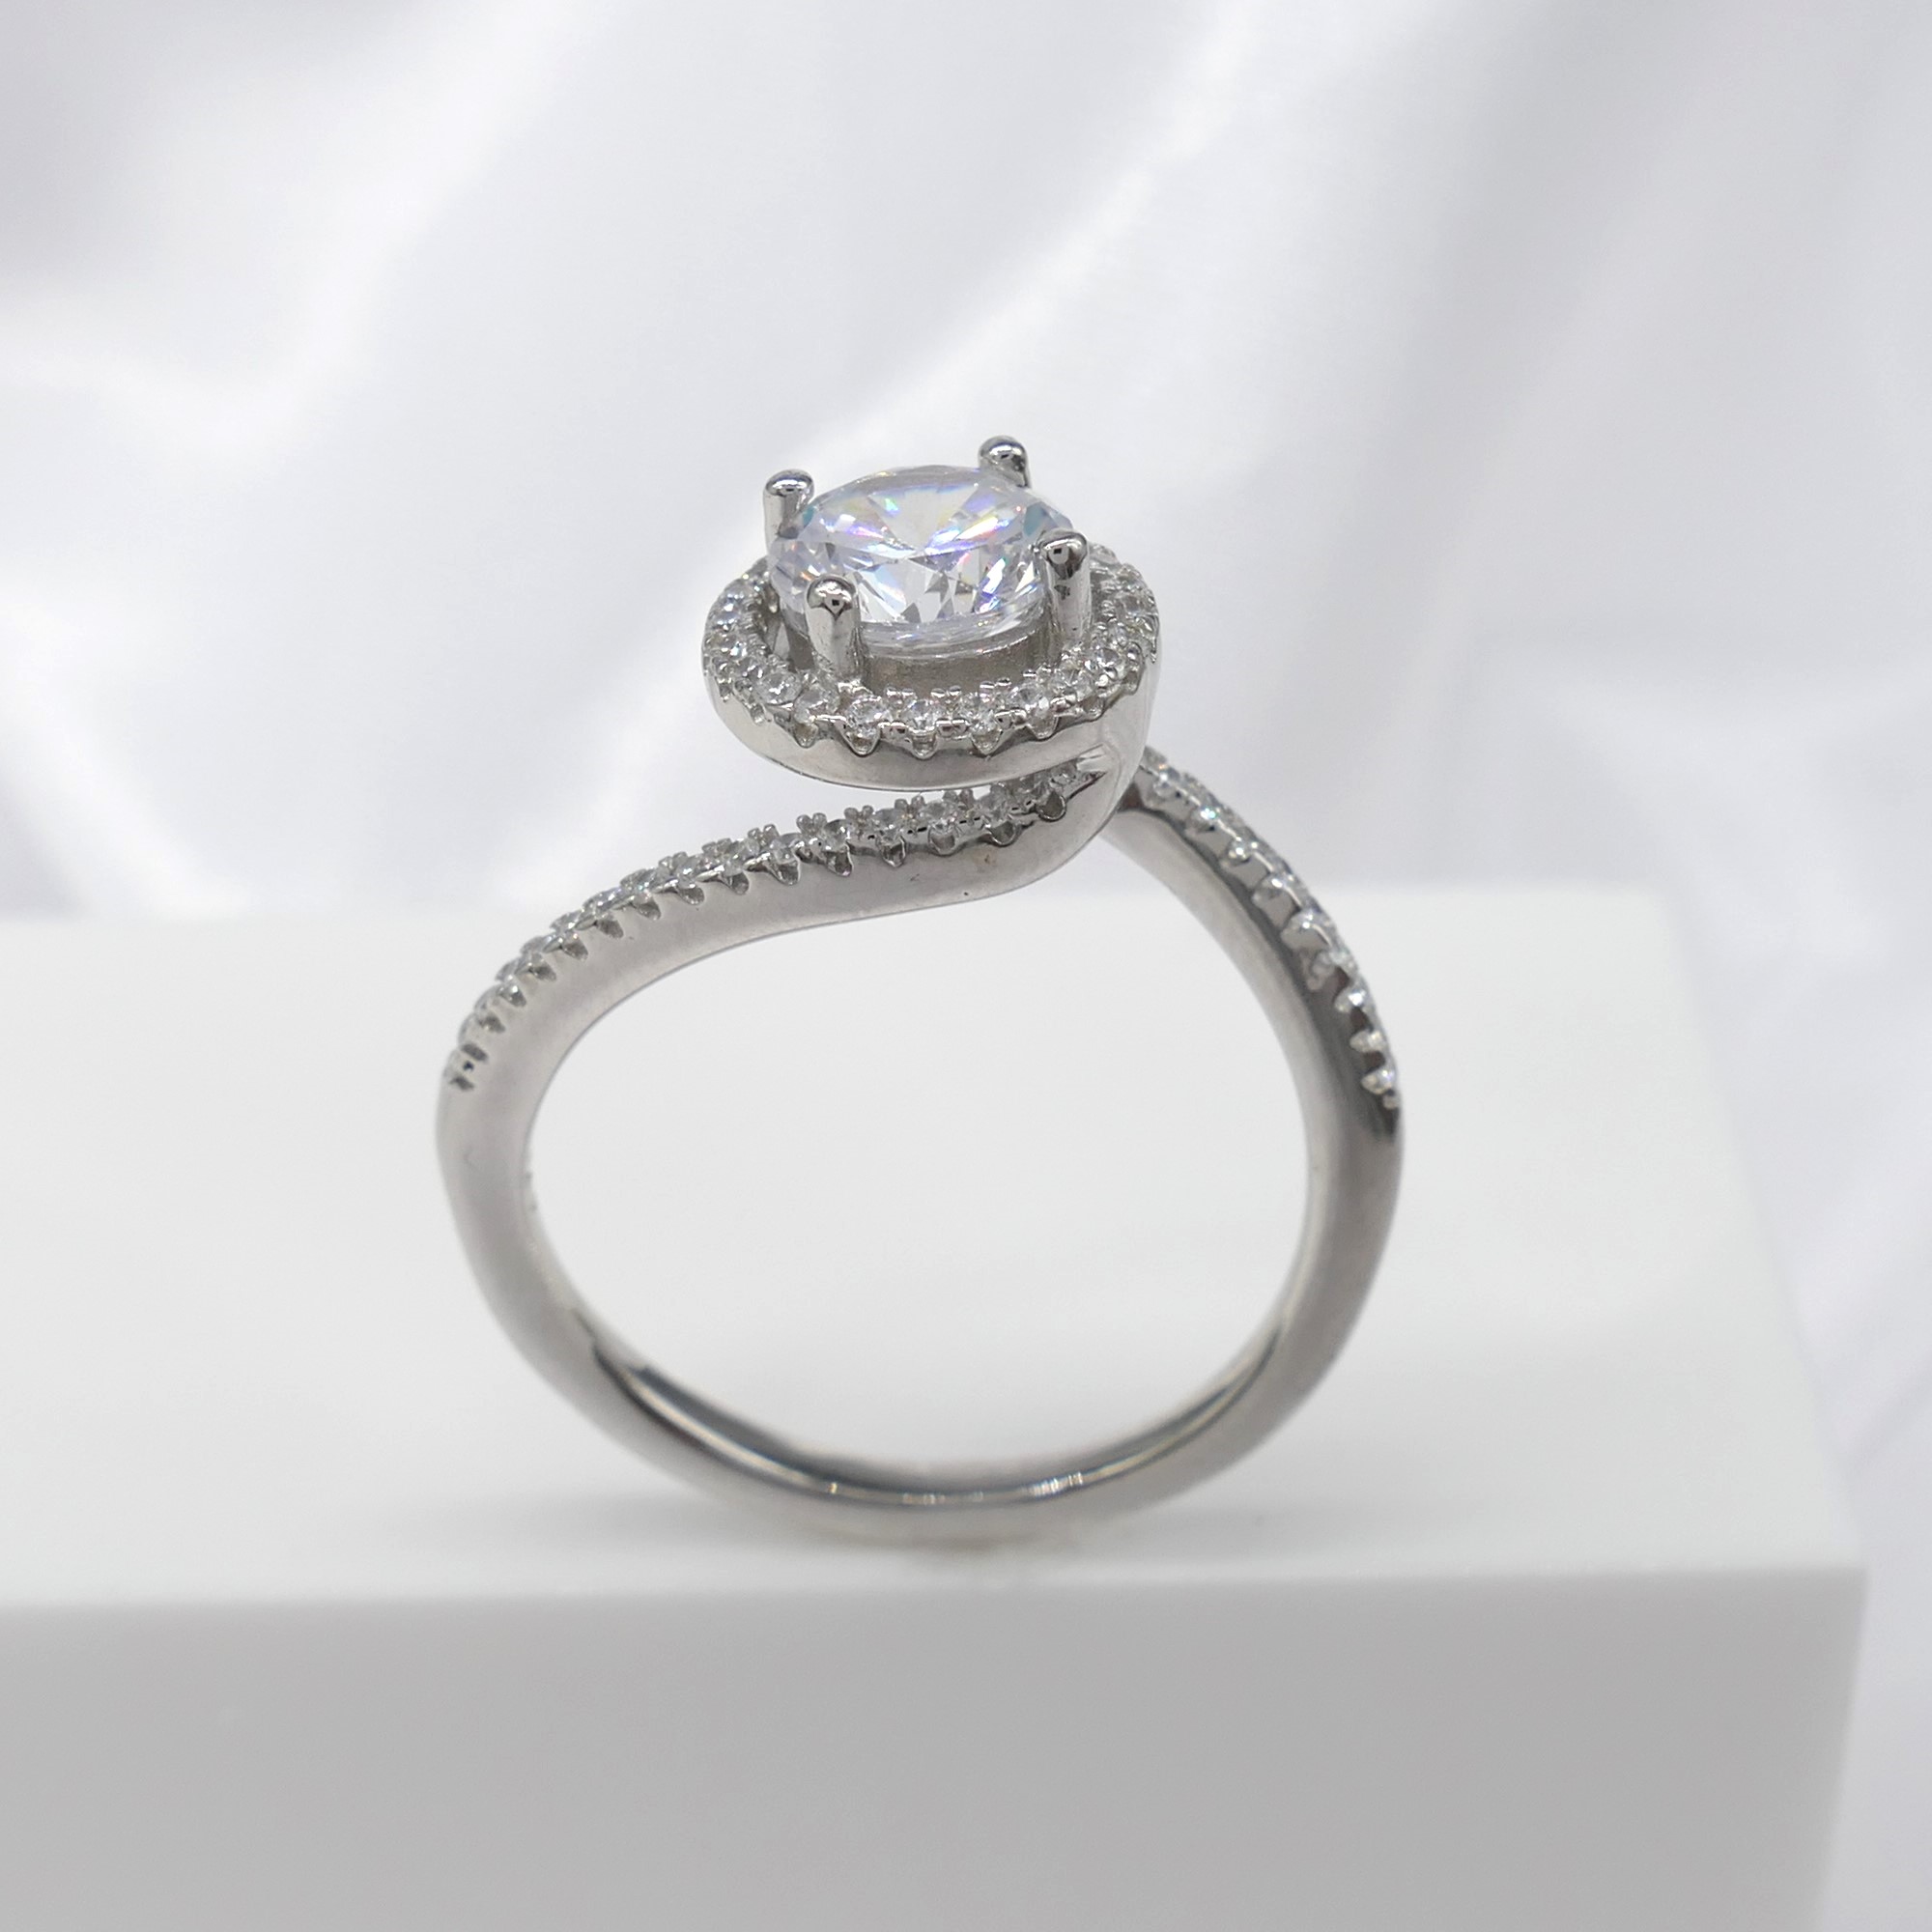 Silver Cubic Zirconia Halo and Twist Dress Ring - Image 6 of 6